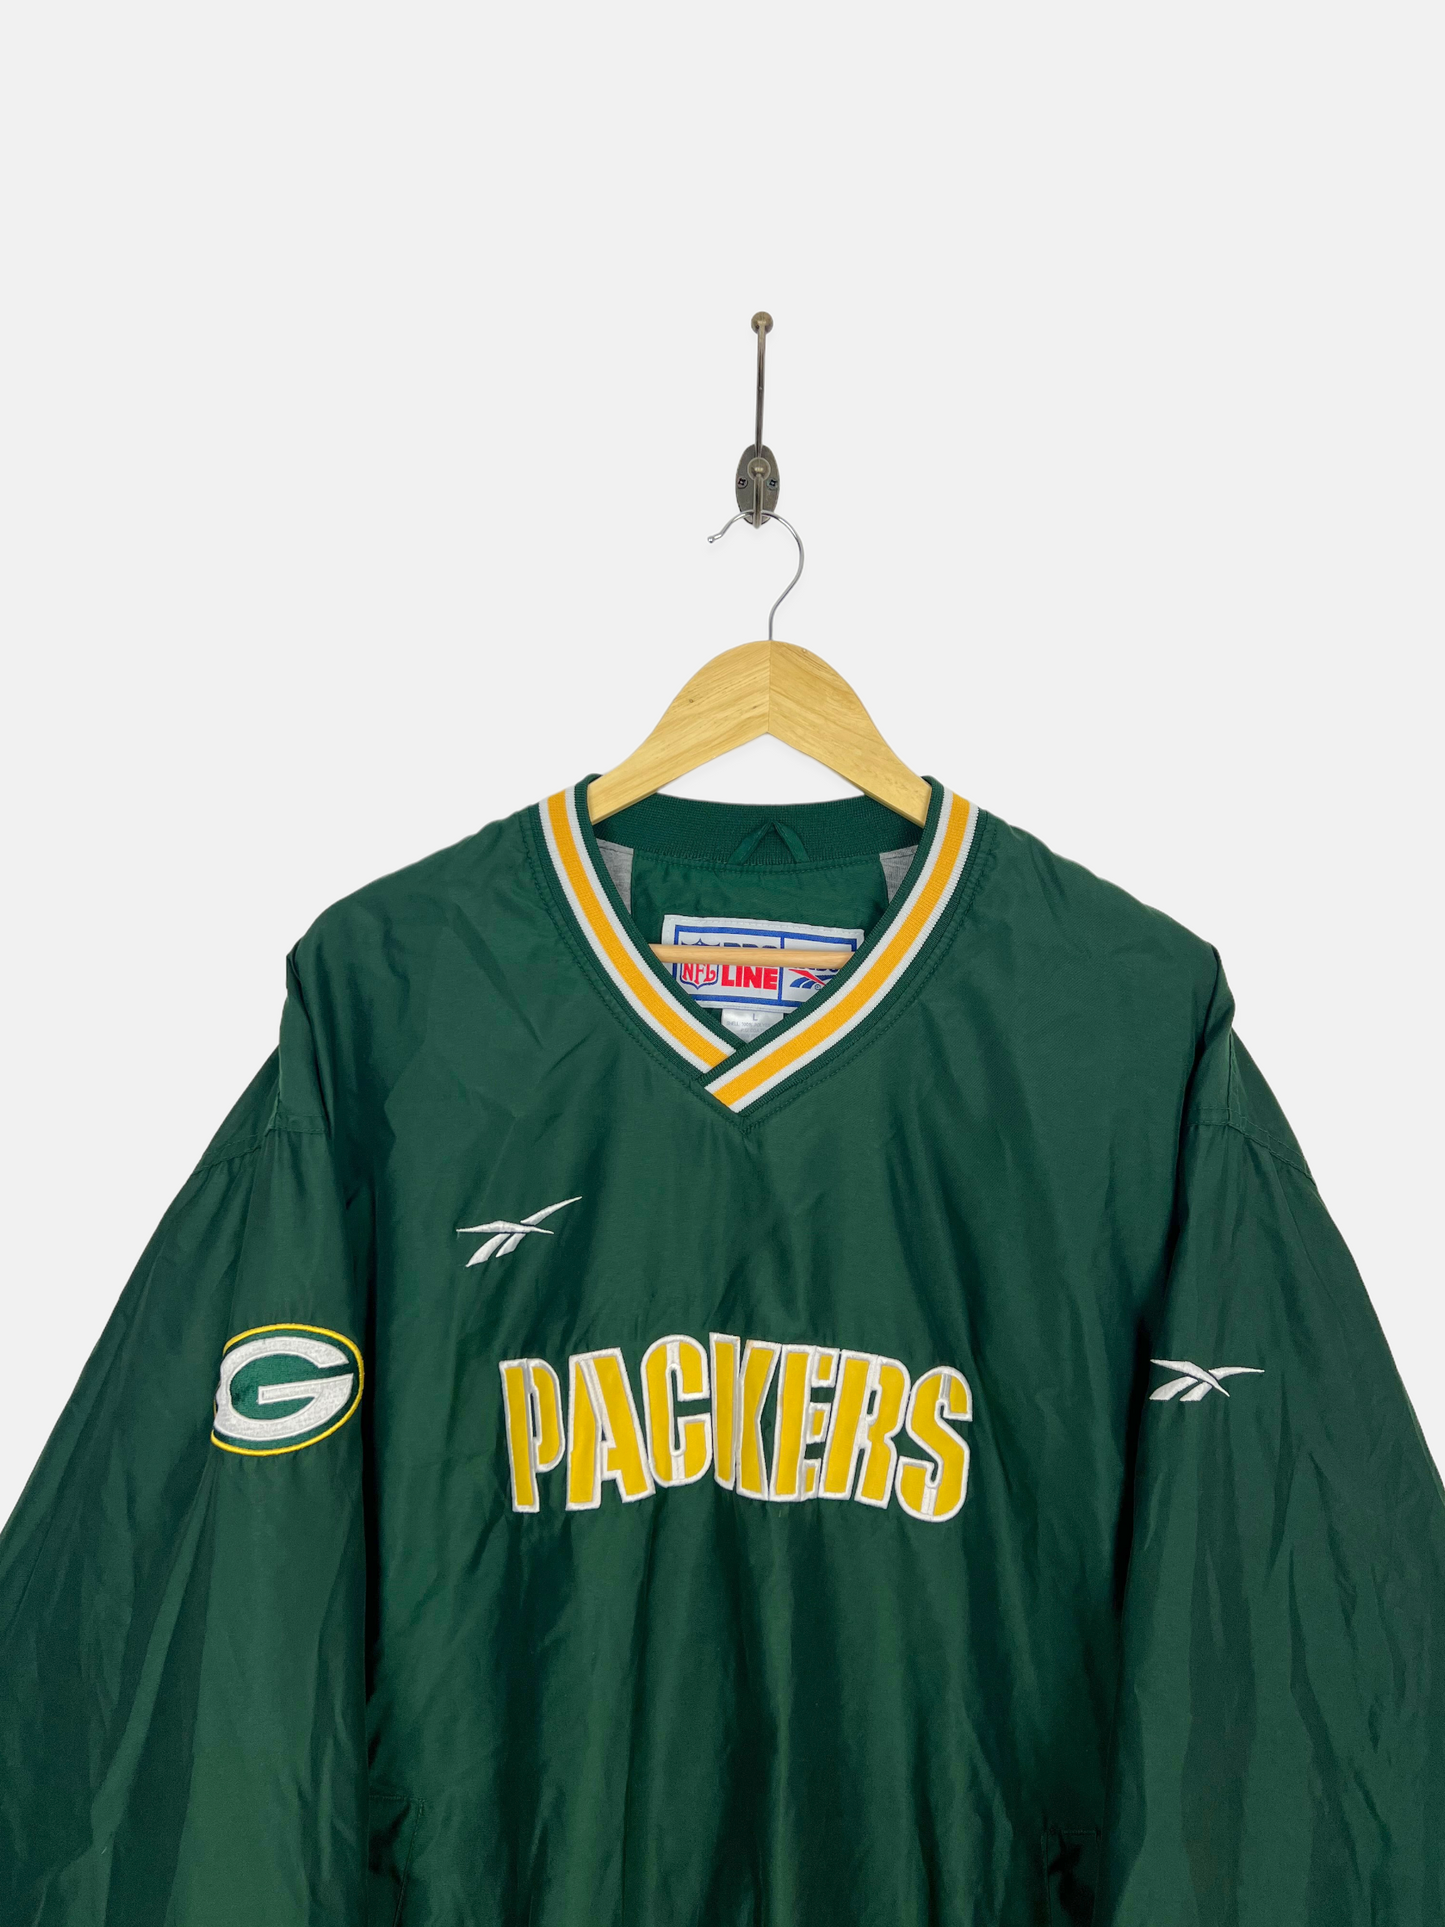 90's Green Bay Packers Reebok NFL Embroidered Vintage Jacket Size L-XL